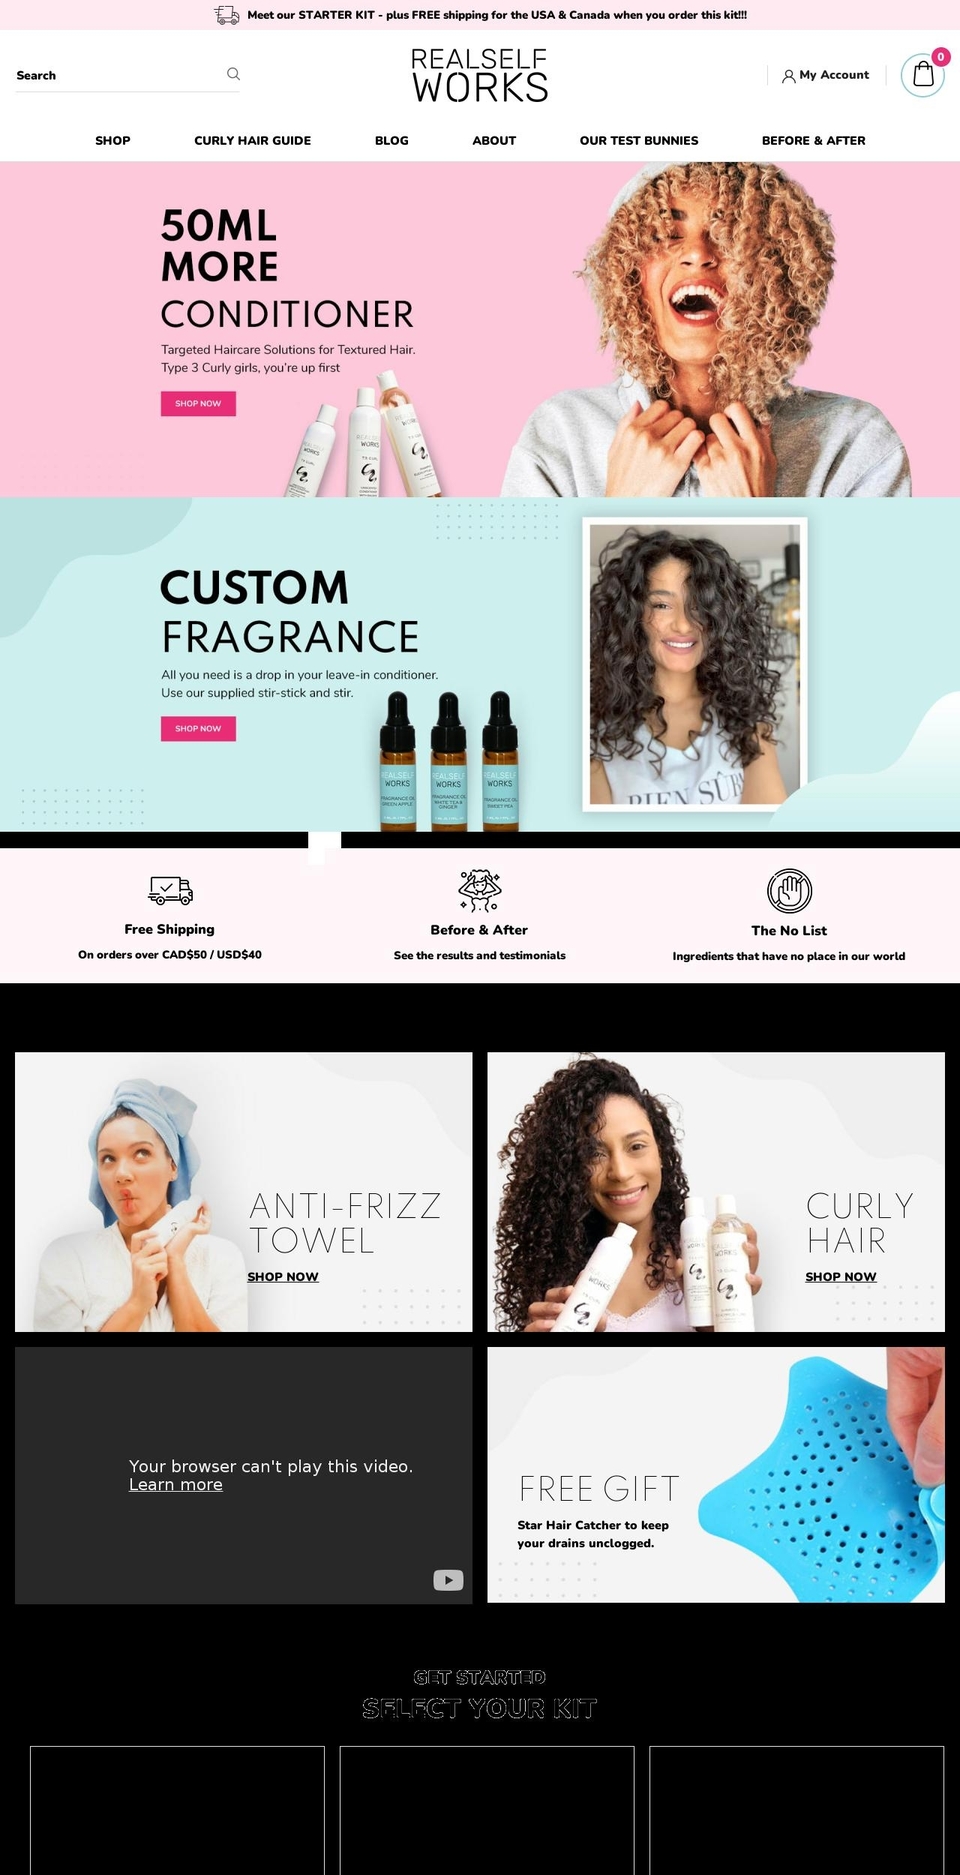 qeretail Shopify theme site example realselfworks.com